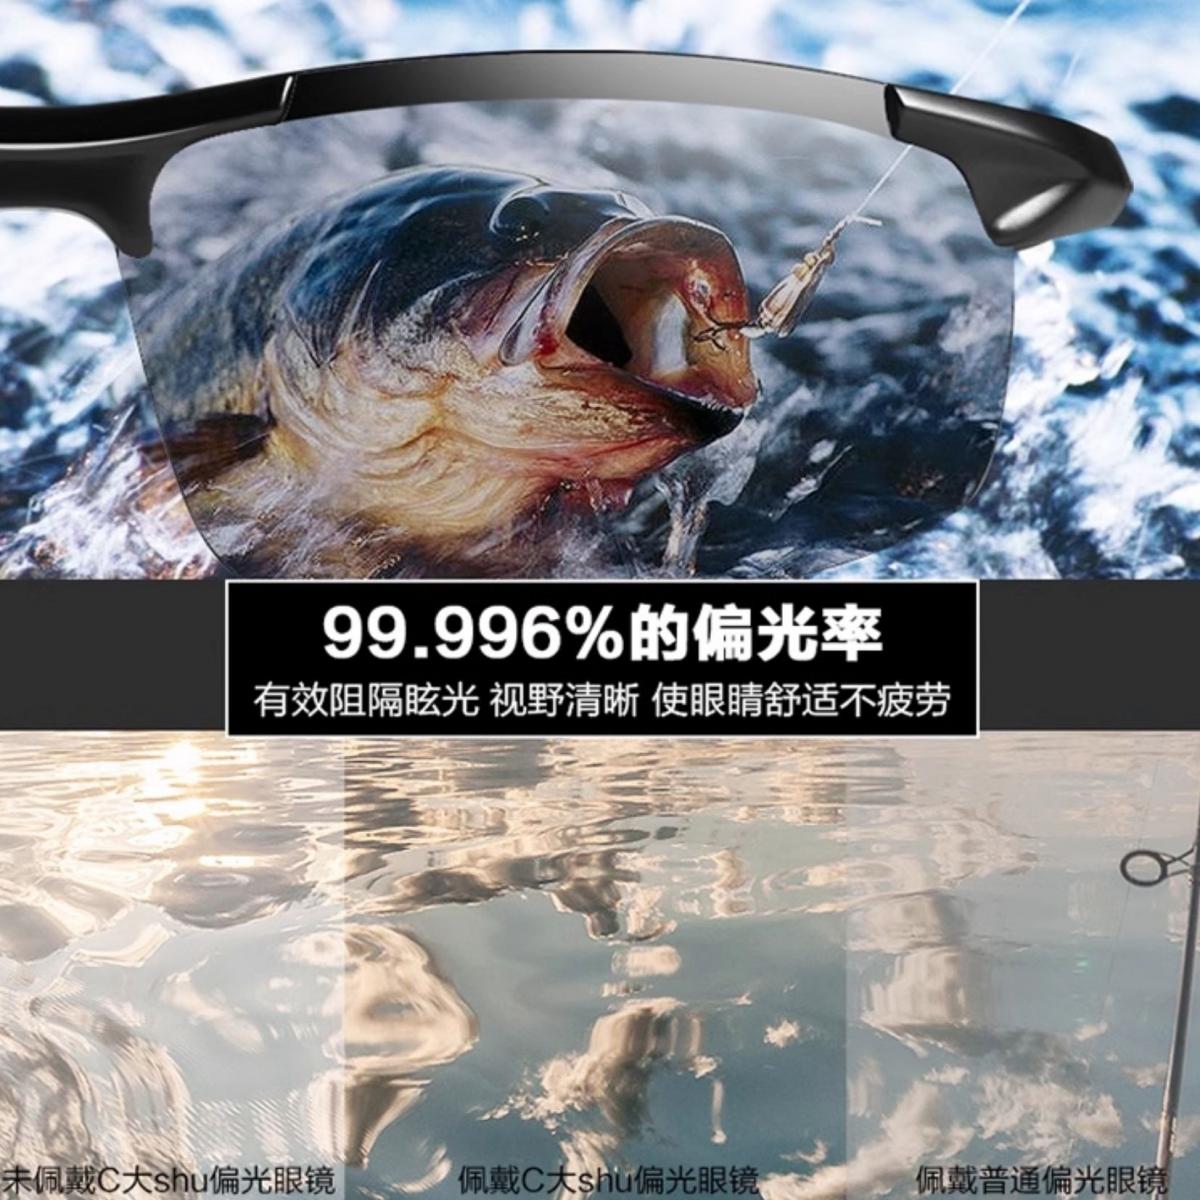 Ultraviolet polarized fishing glasses for men, special high-definition  fishing - Parallel Import